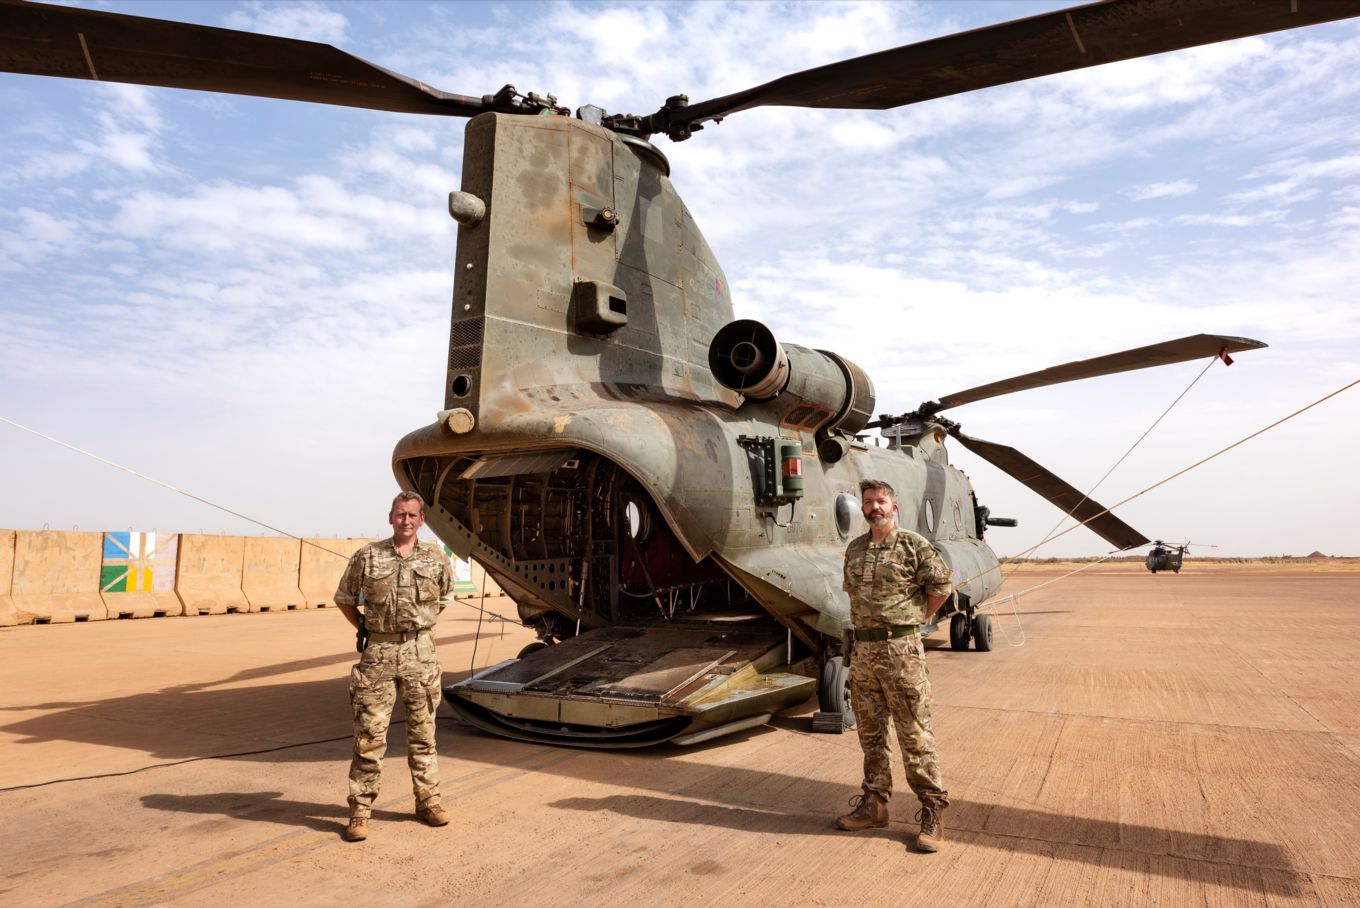 image shows personnel standing next to an RAF Chinook helicopter.